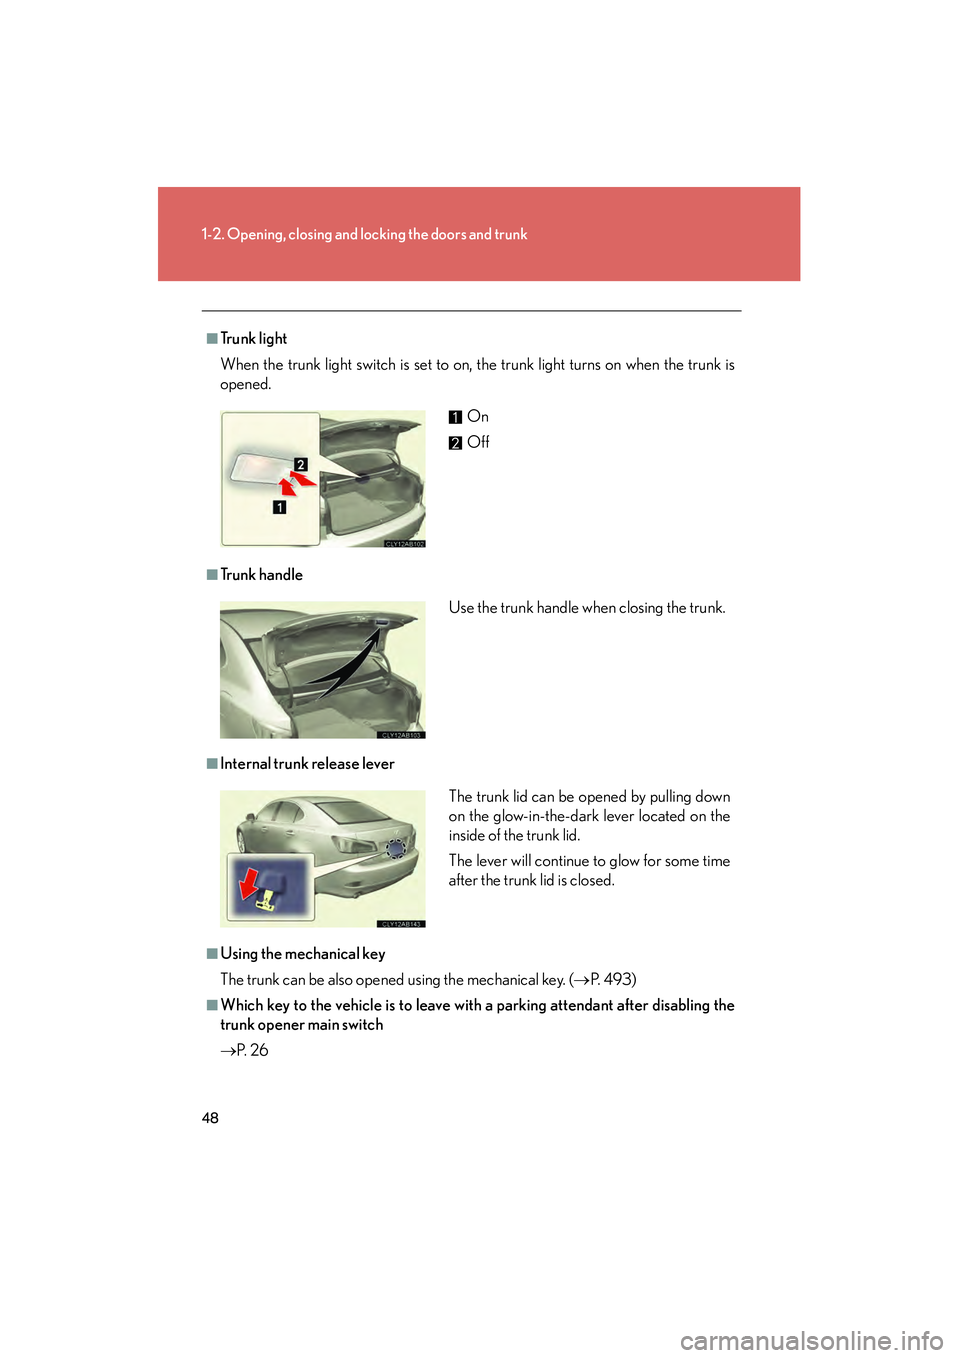 Lexus IS250 2011 Service Manual 48
1-2. Opening, closing and locking the doors and trunk
IS350/250_U
■Trunk light
When the trunk light switch is set to on, the trunk light turns on when the trunk is
opened. 
■Tr u n k  h a n d l